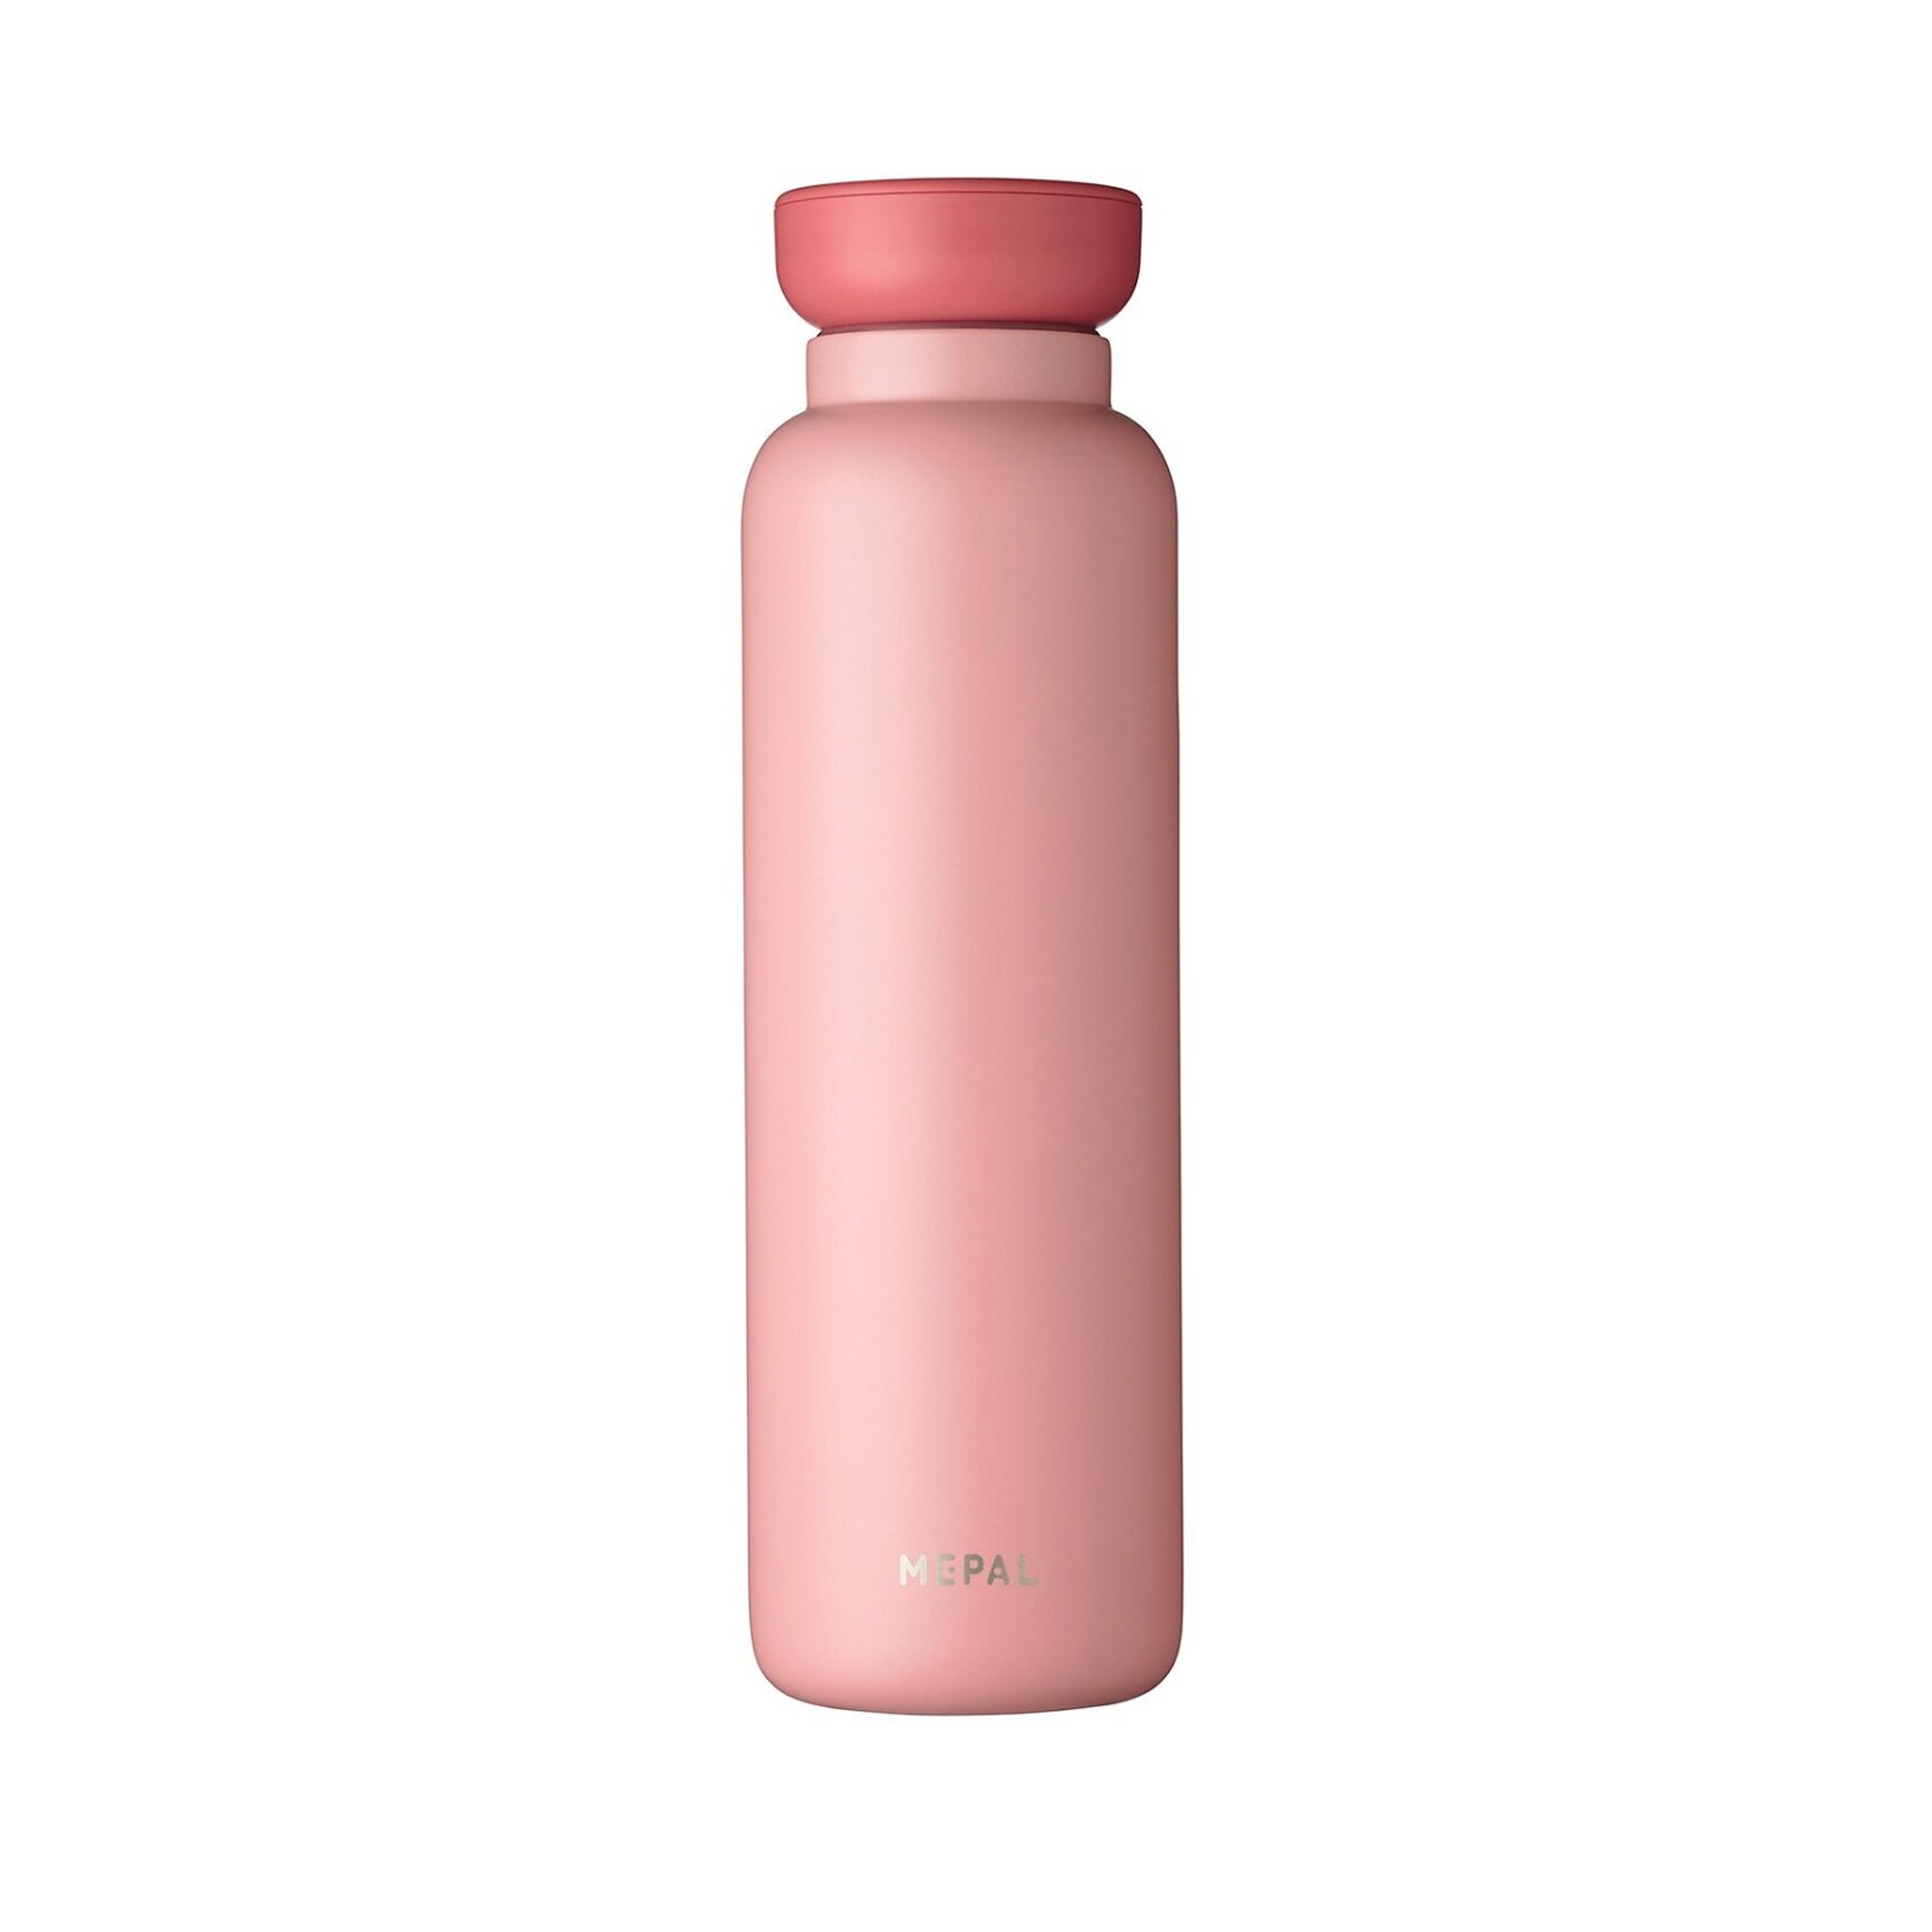 Mepal - Ellipse thermal bottle 900ml - different colors